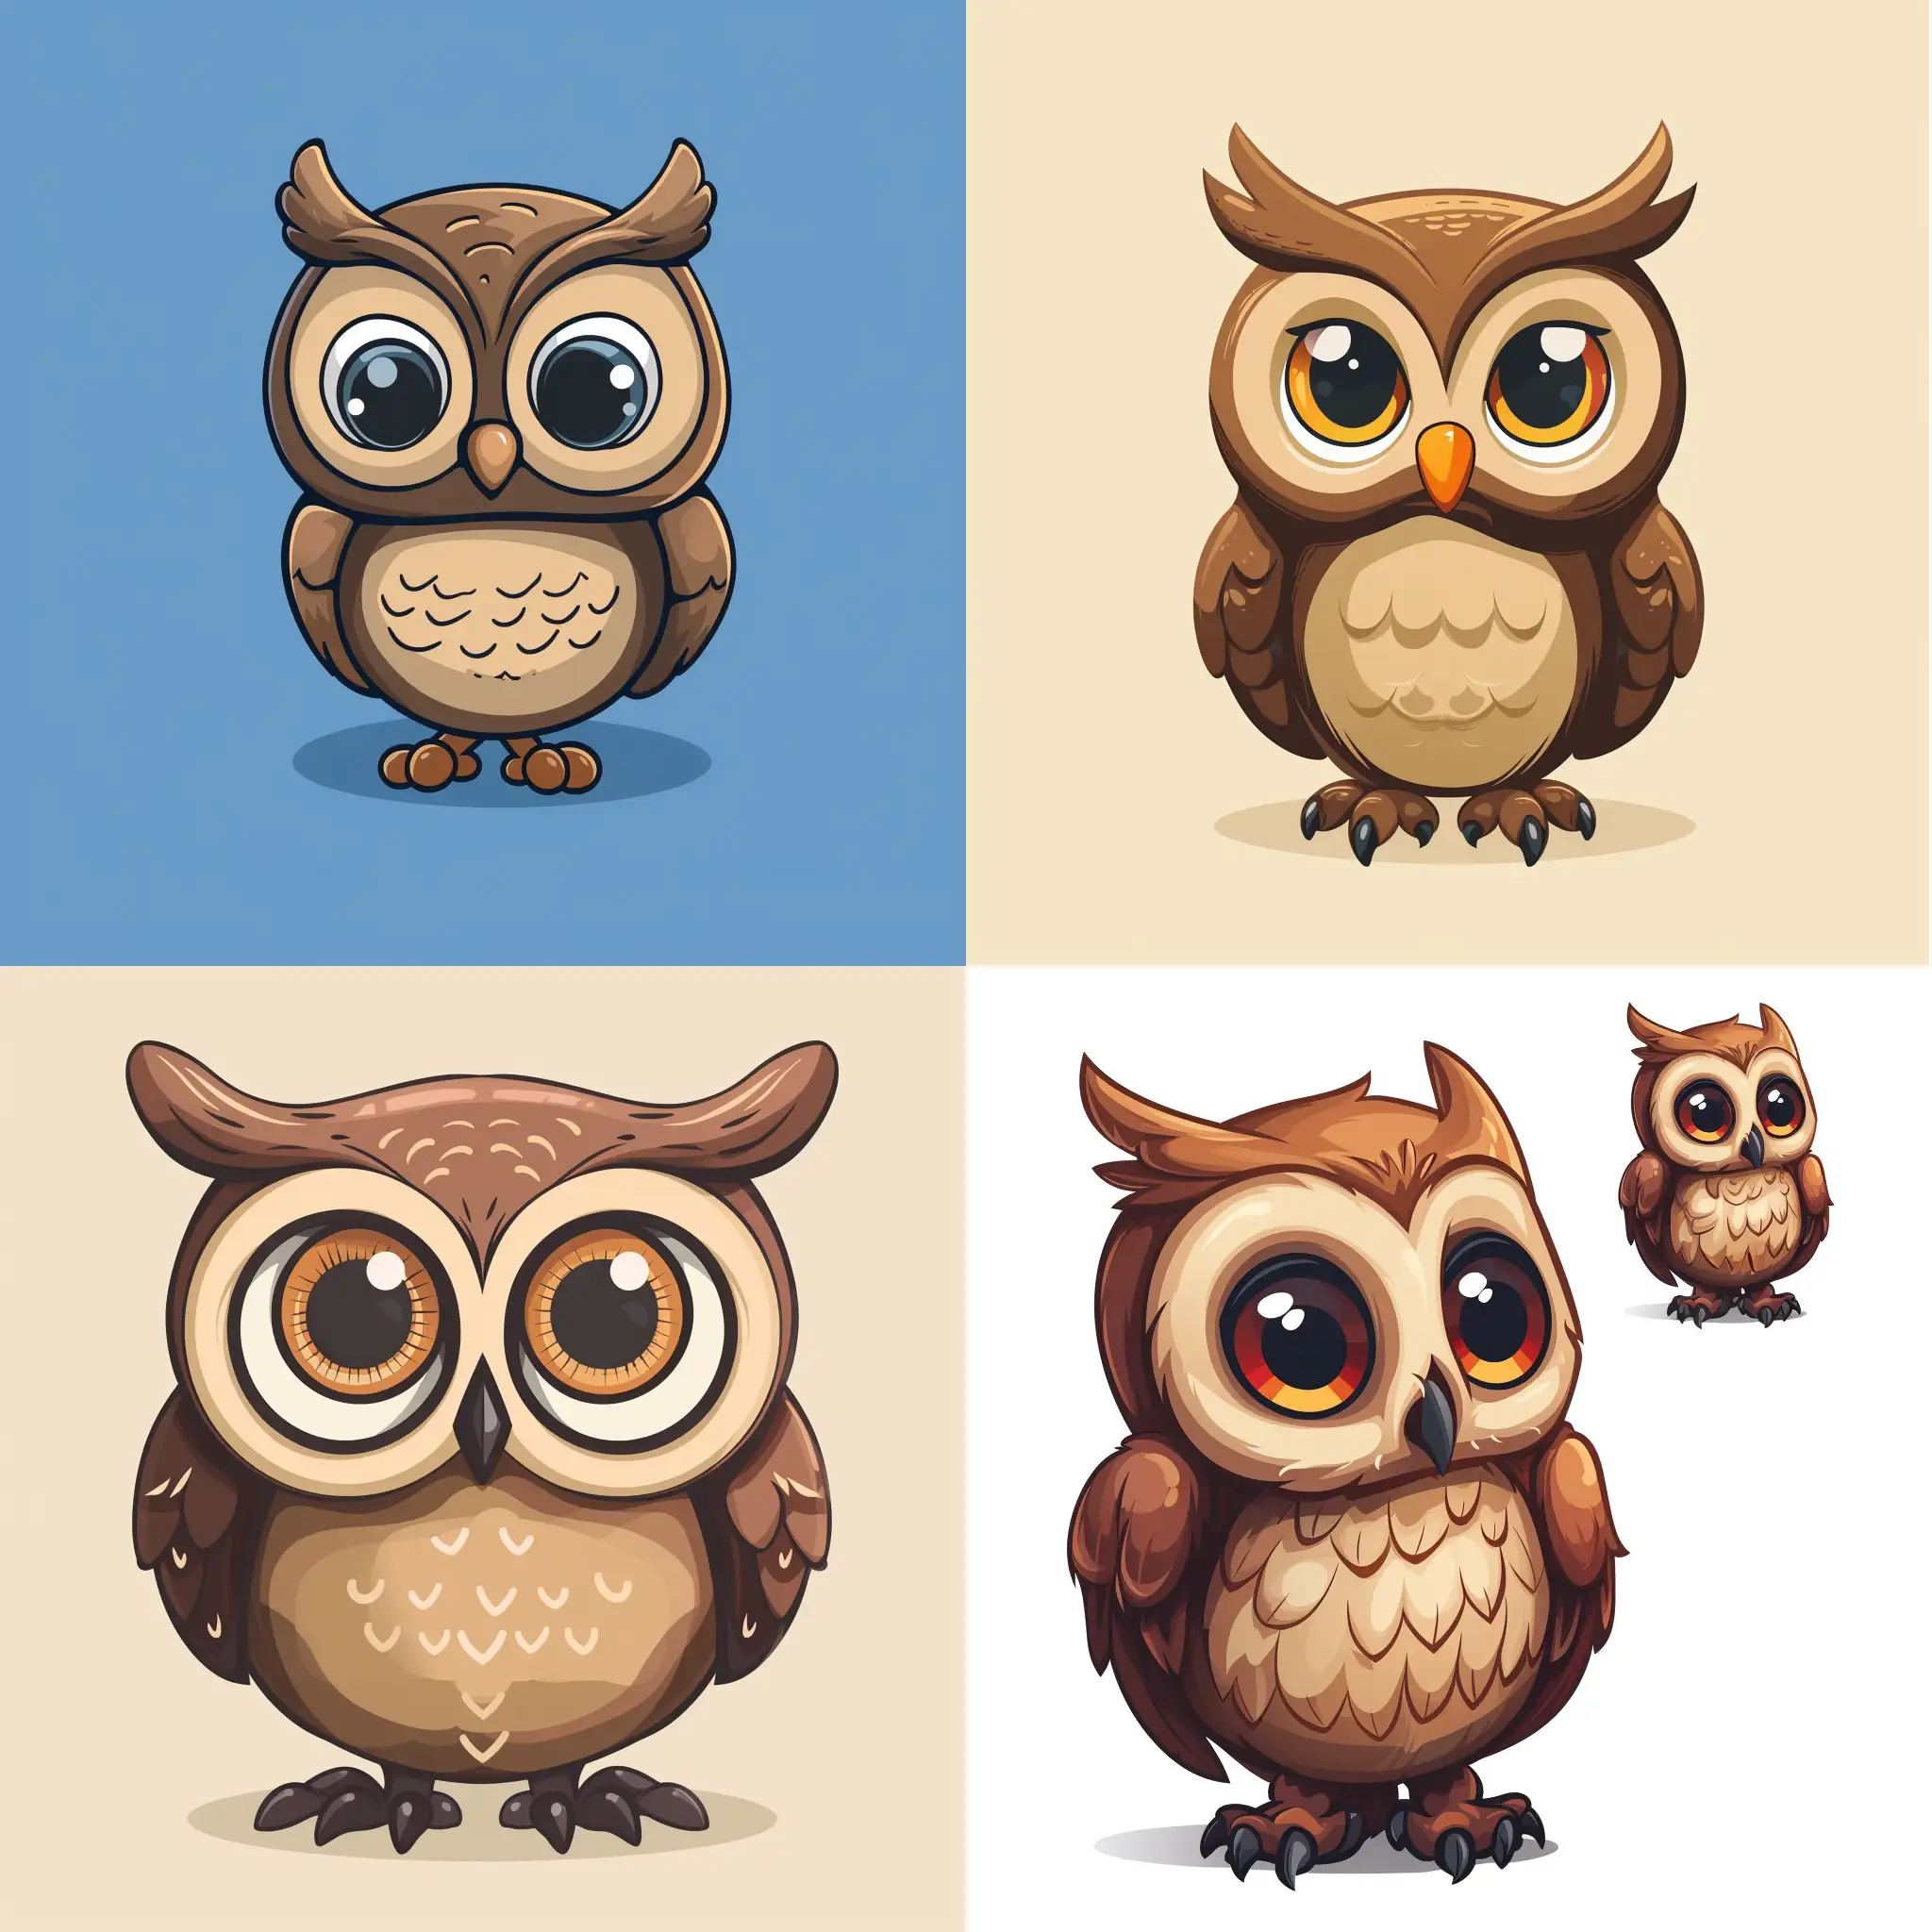 Adorable-Owl-Mascot-with-Vibrant-Colors-in-a-Square-Frame